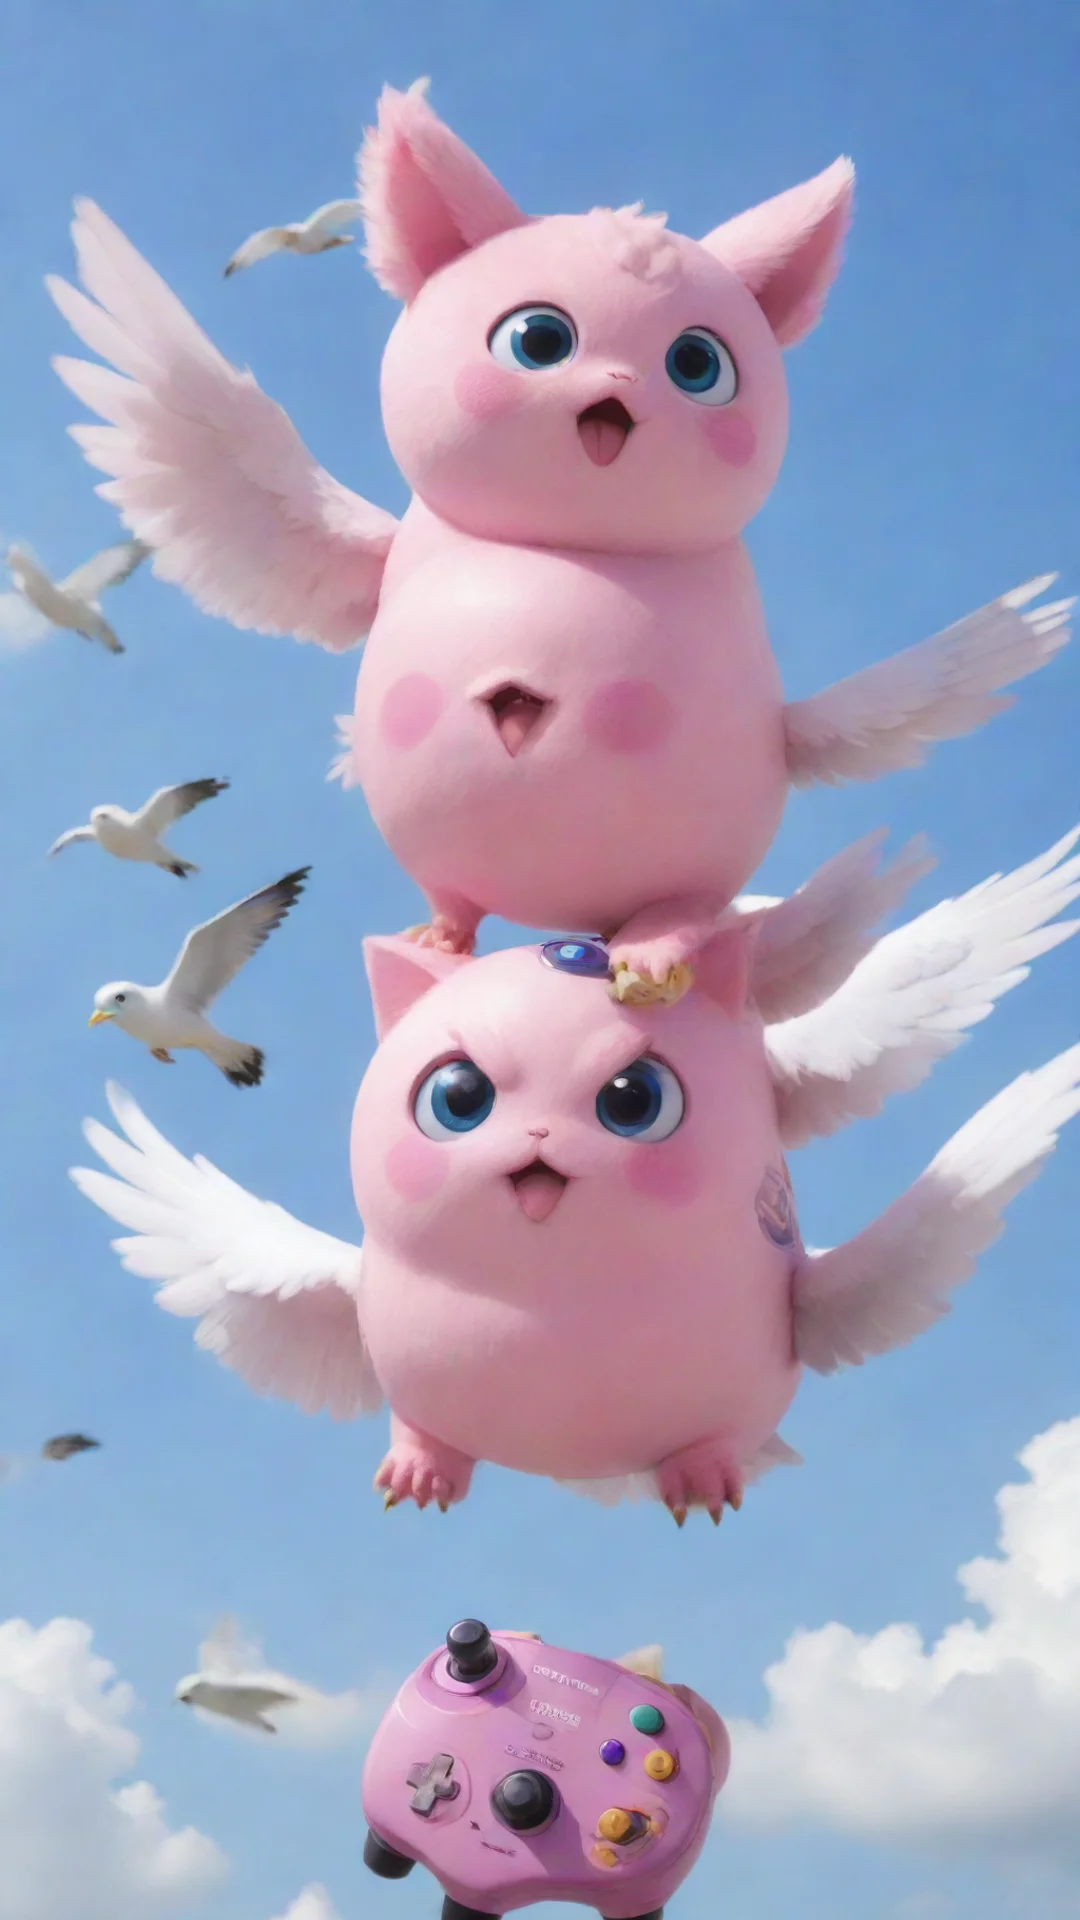 aijigglypuff riding a seagull with a gamecube controller tall